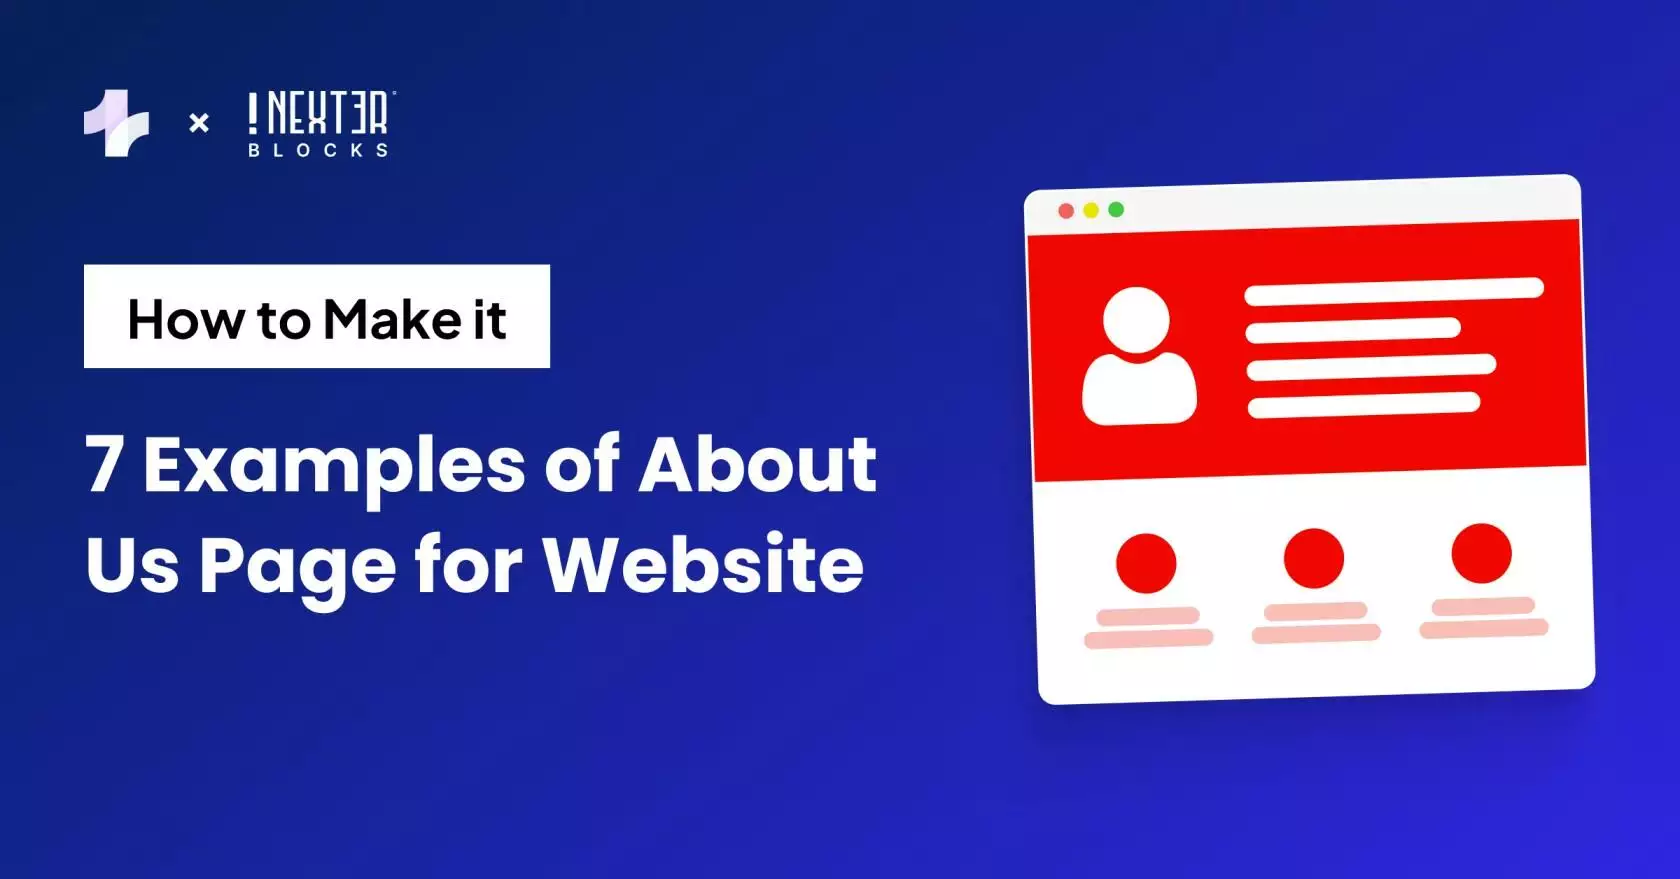 7 Examples of About Us Page for Website How to Make it - 7 Examples of About Us Page for Website [+ How to Make it]